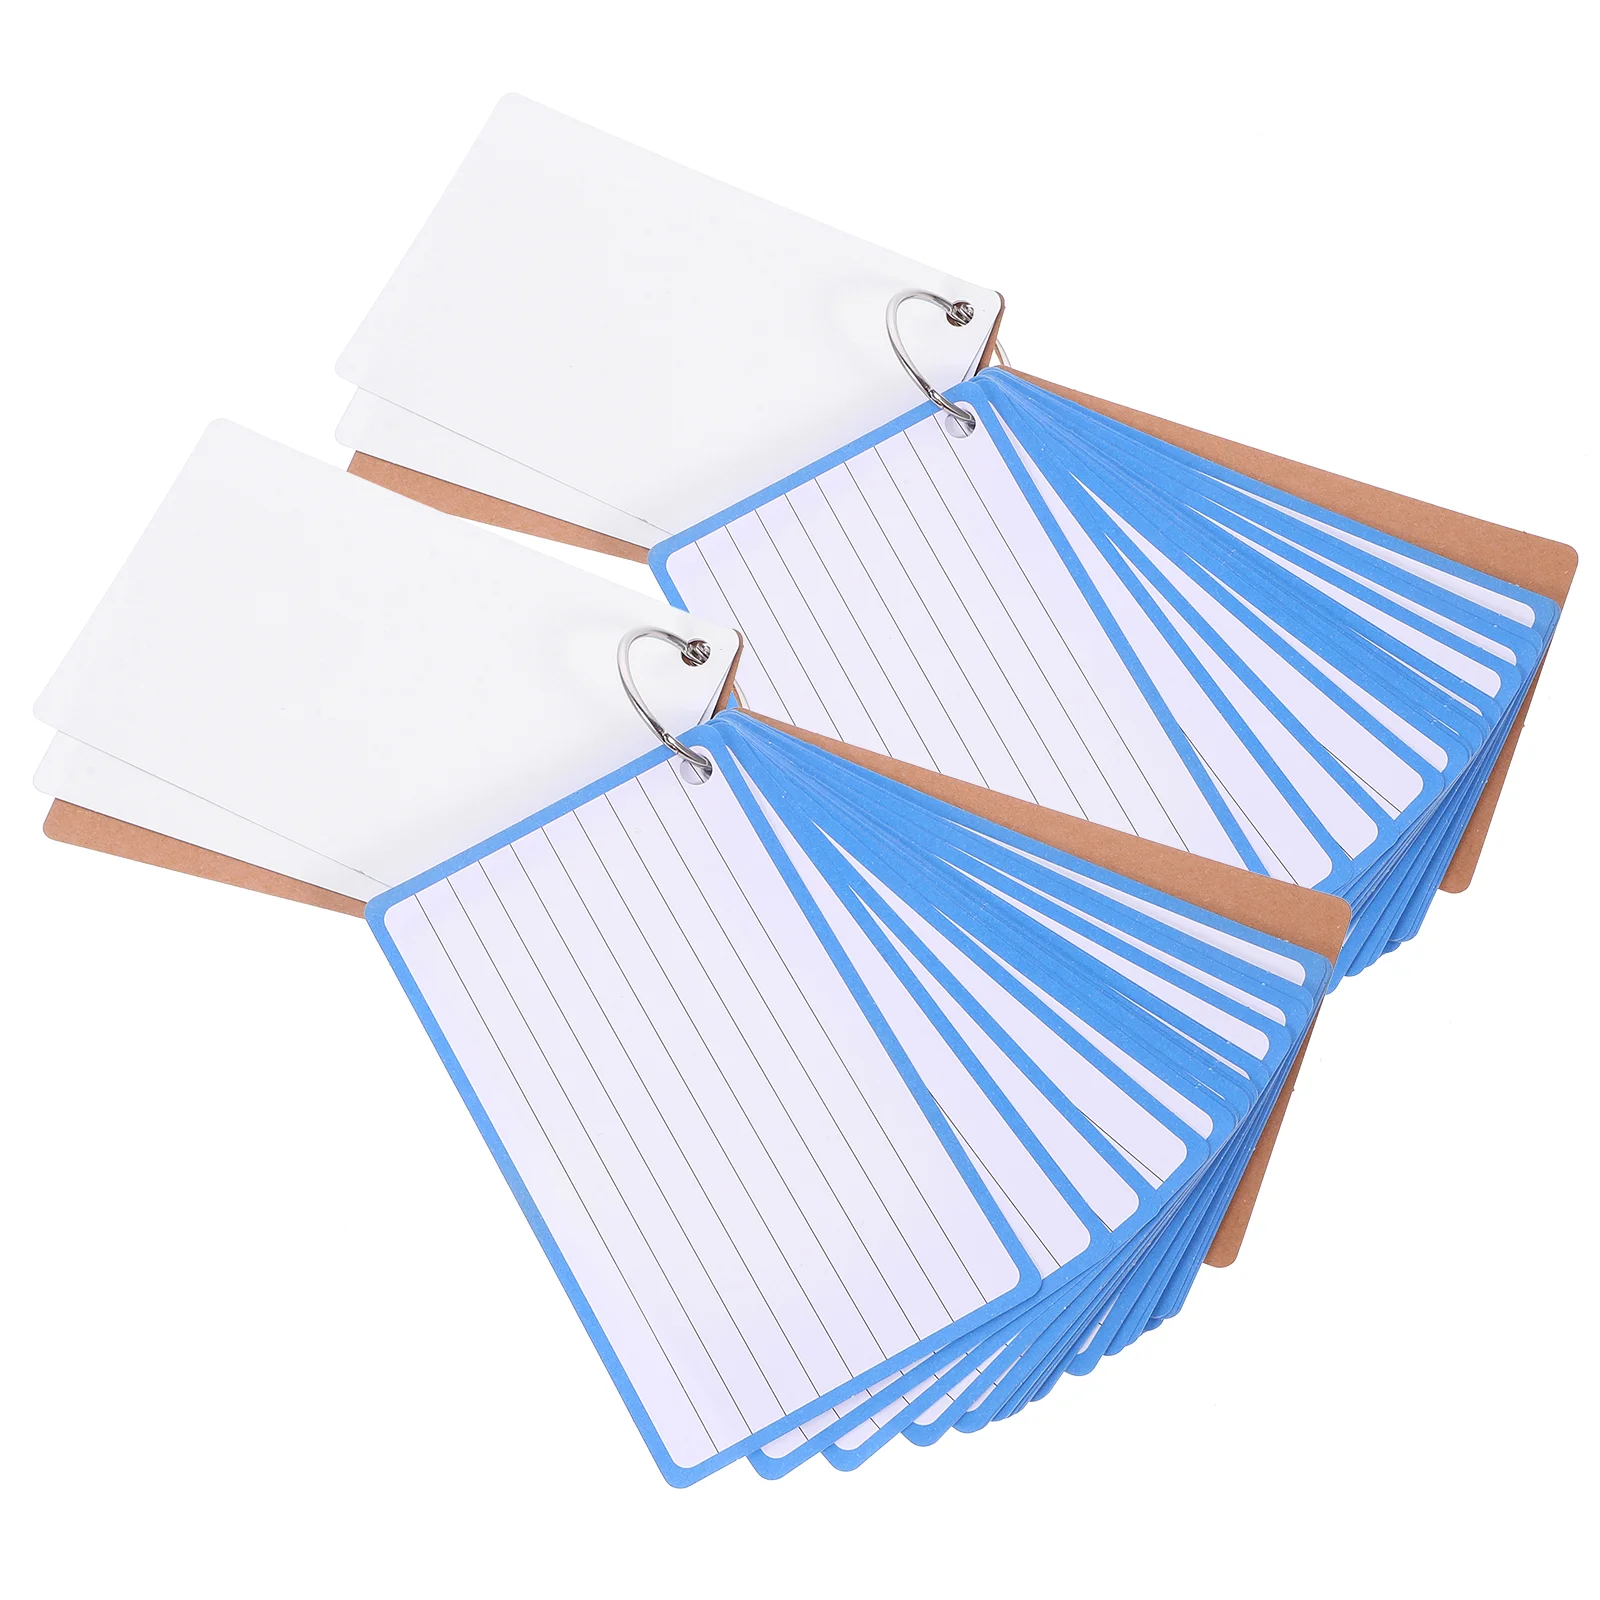 2 Books of Lined Flash Cards Colorful Flash Cards Blank Colored Card Index Cards for Office 2 books of memo blank cards index cards lined cards diy graffiti cards colored index card